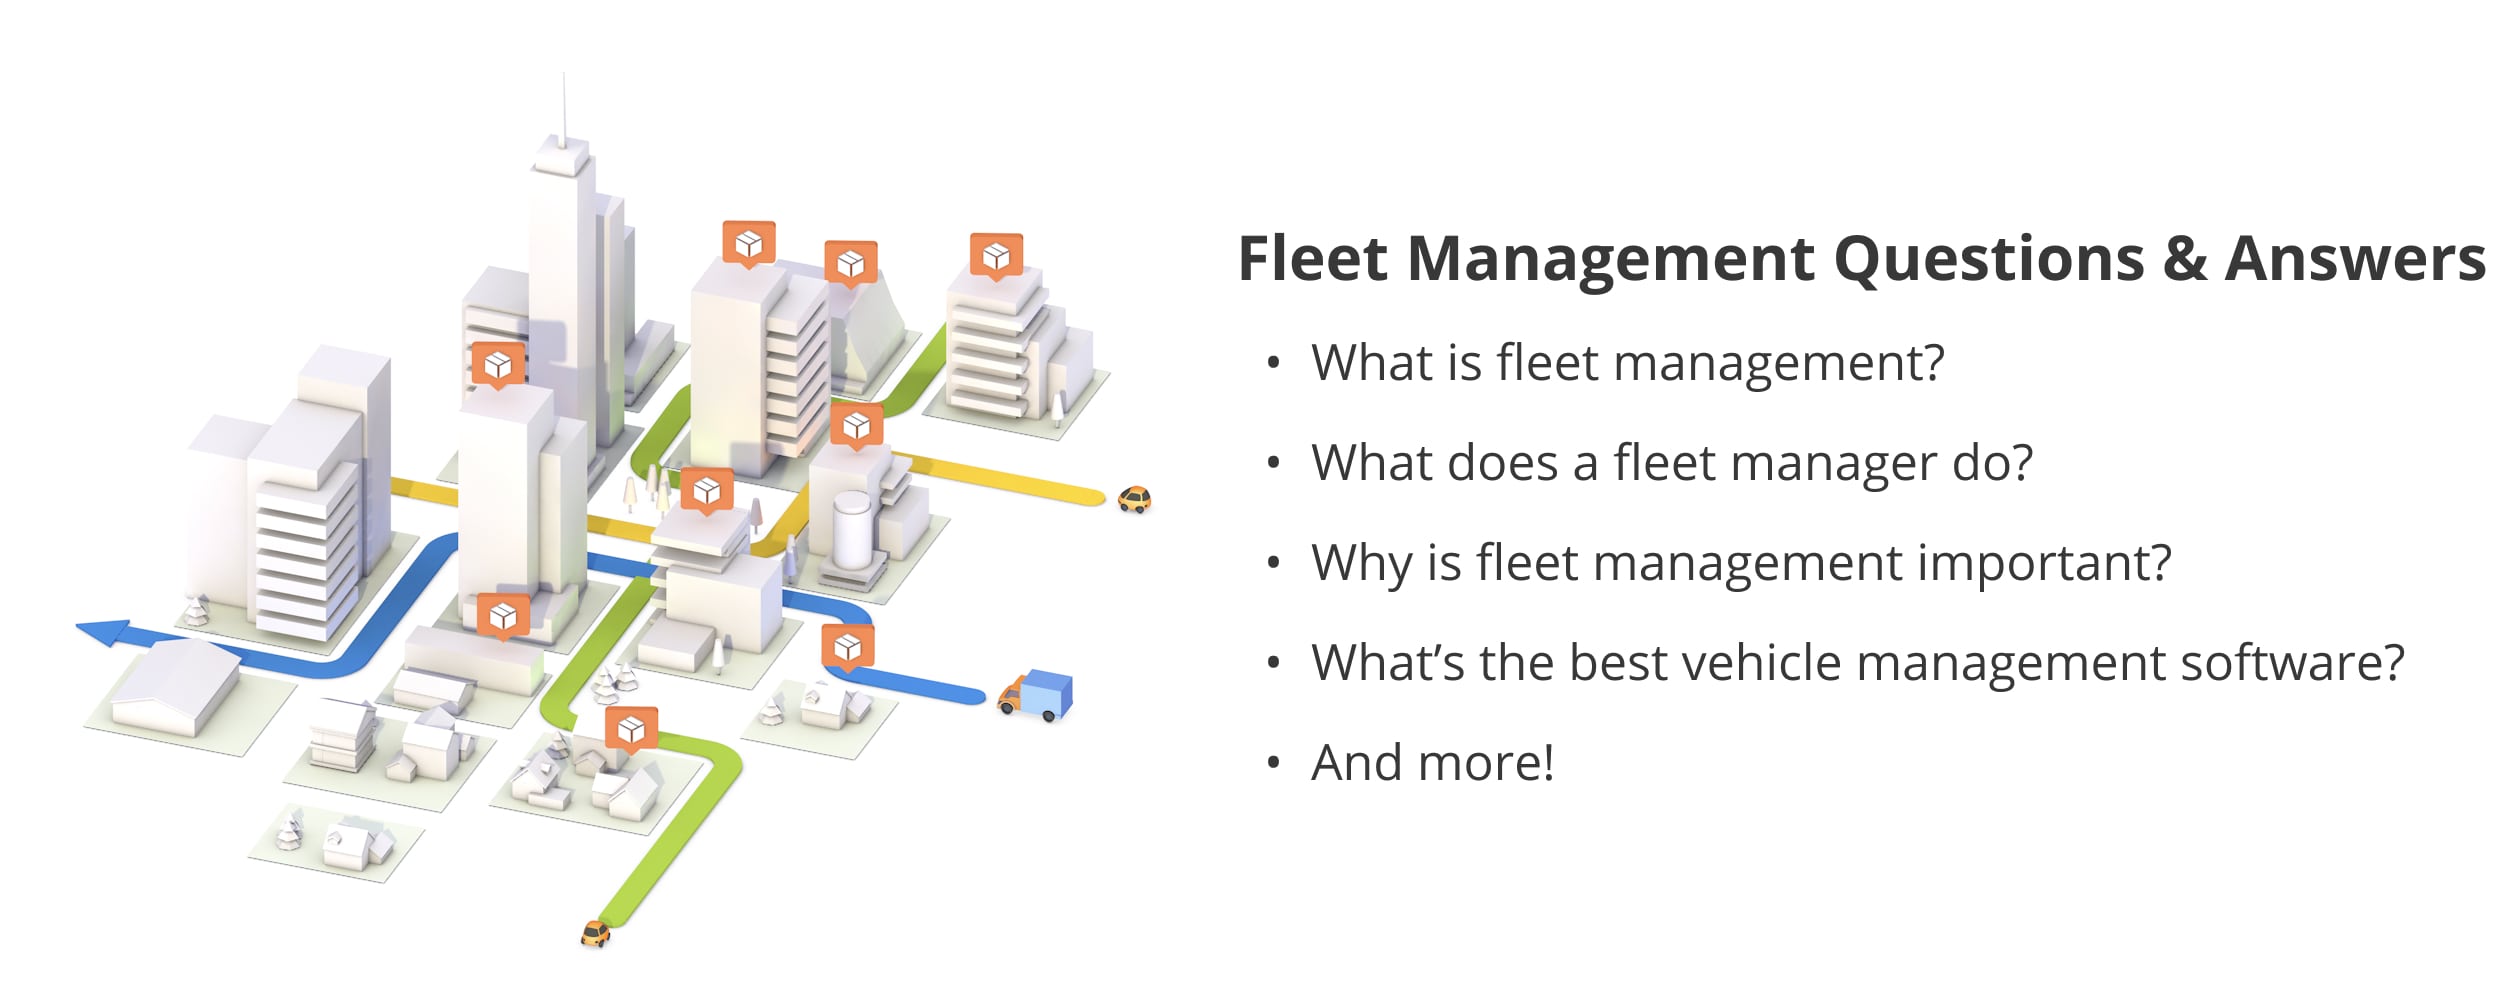 Frequently asked questions about fleet management answered by Route4Me's fleet management experts.